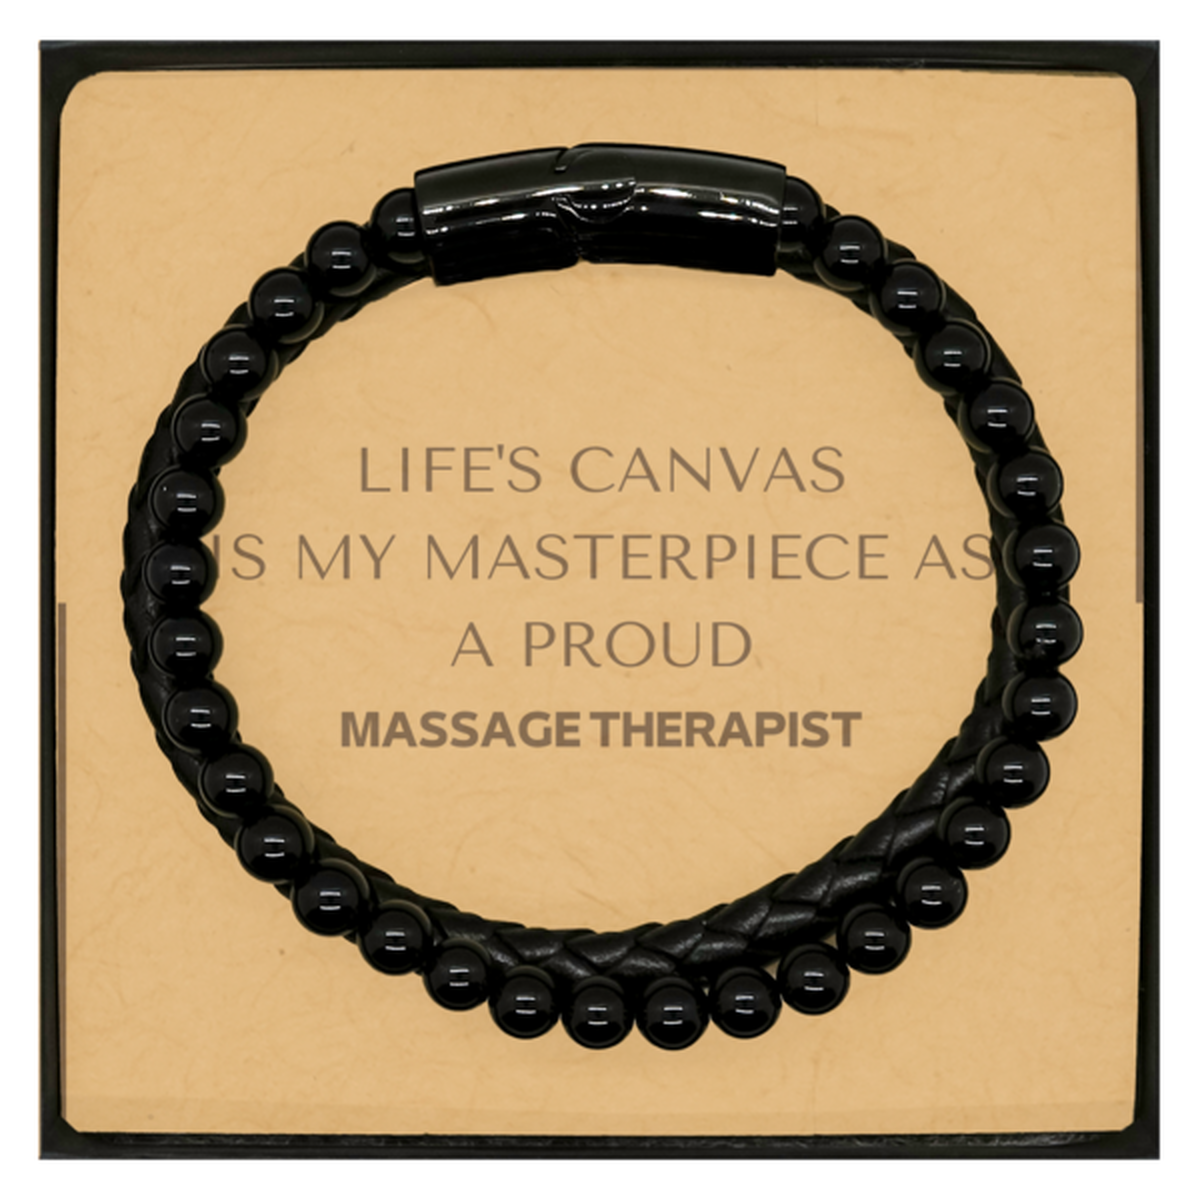 Proud Massage Therapist Gifts, Life's canvas is my masterpiece, Epic Birthday Christmas Unique Stone Leather Bracelets For Massage Therapist, Coworkers, Men, Women, Friends